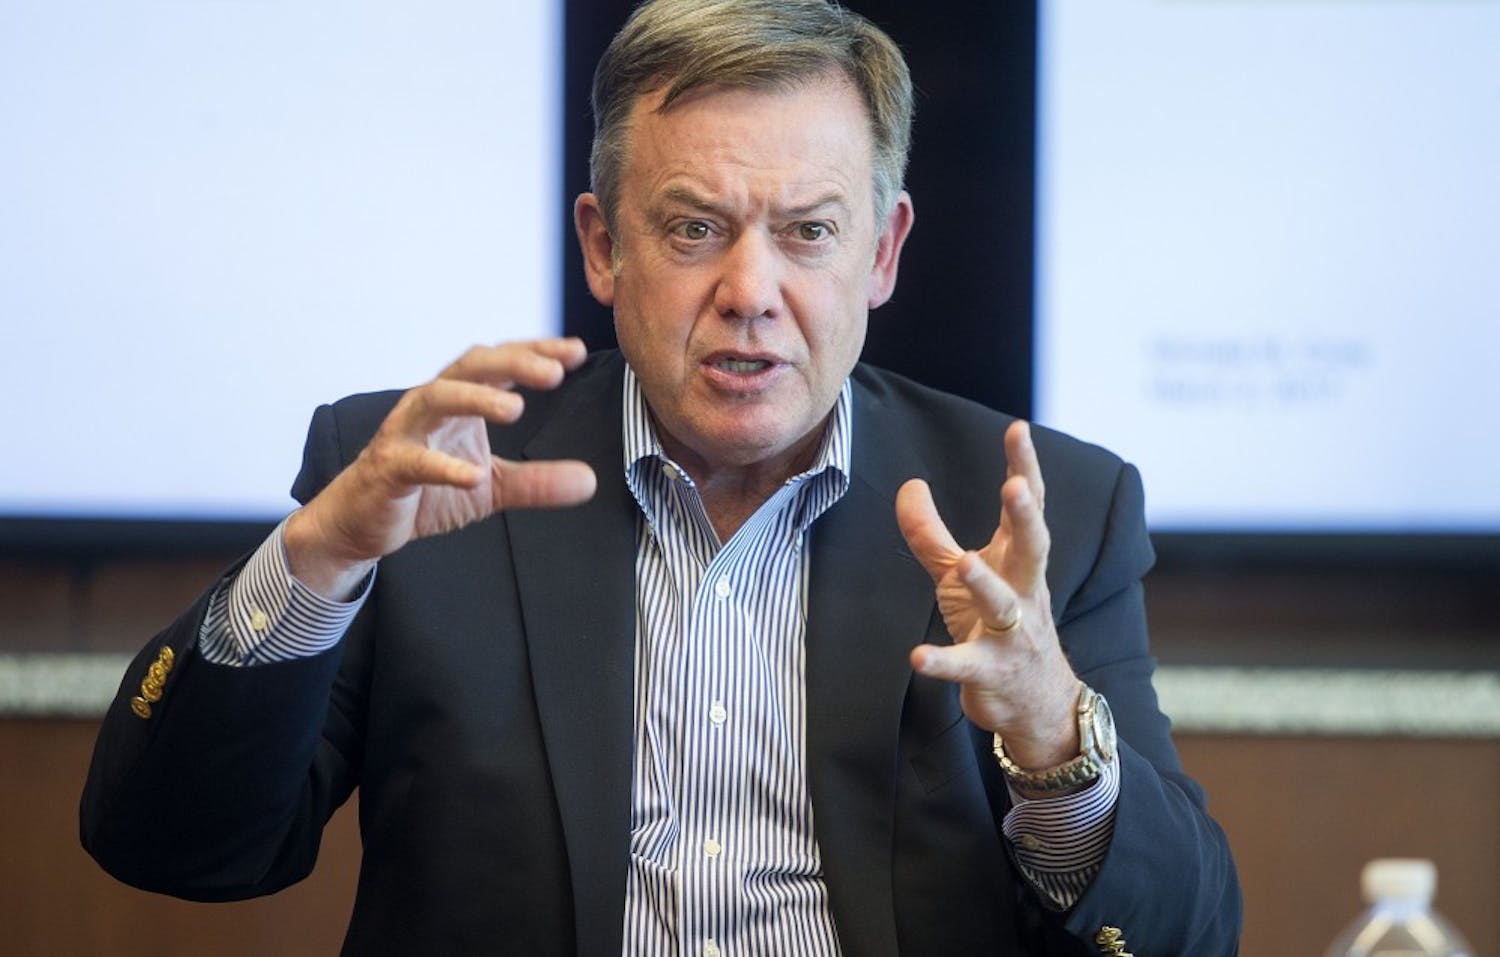 ASU President Michael Crow meets with The State Press editorial board in a conference room in the Fulton Center on the Tempe campus on March 2, 2017.